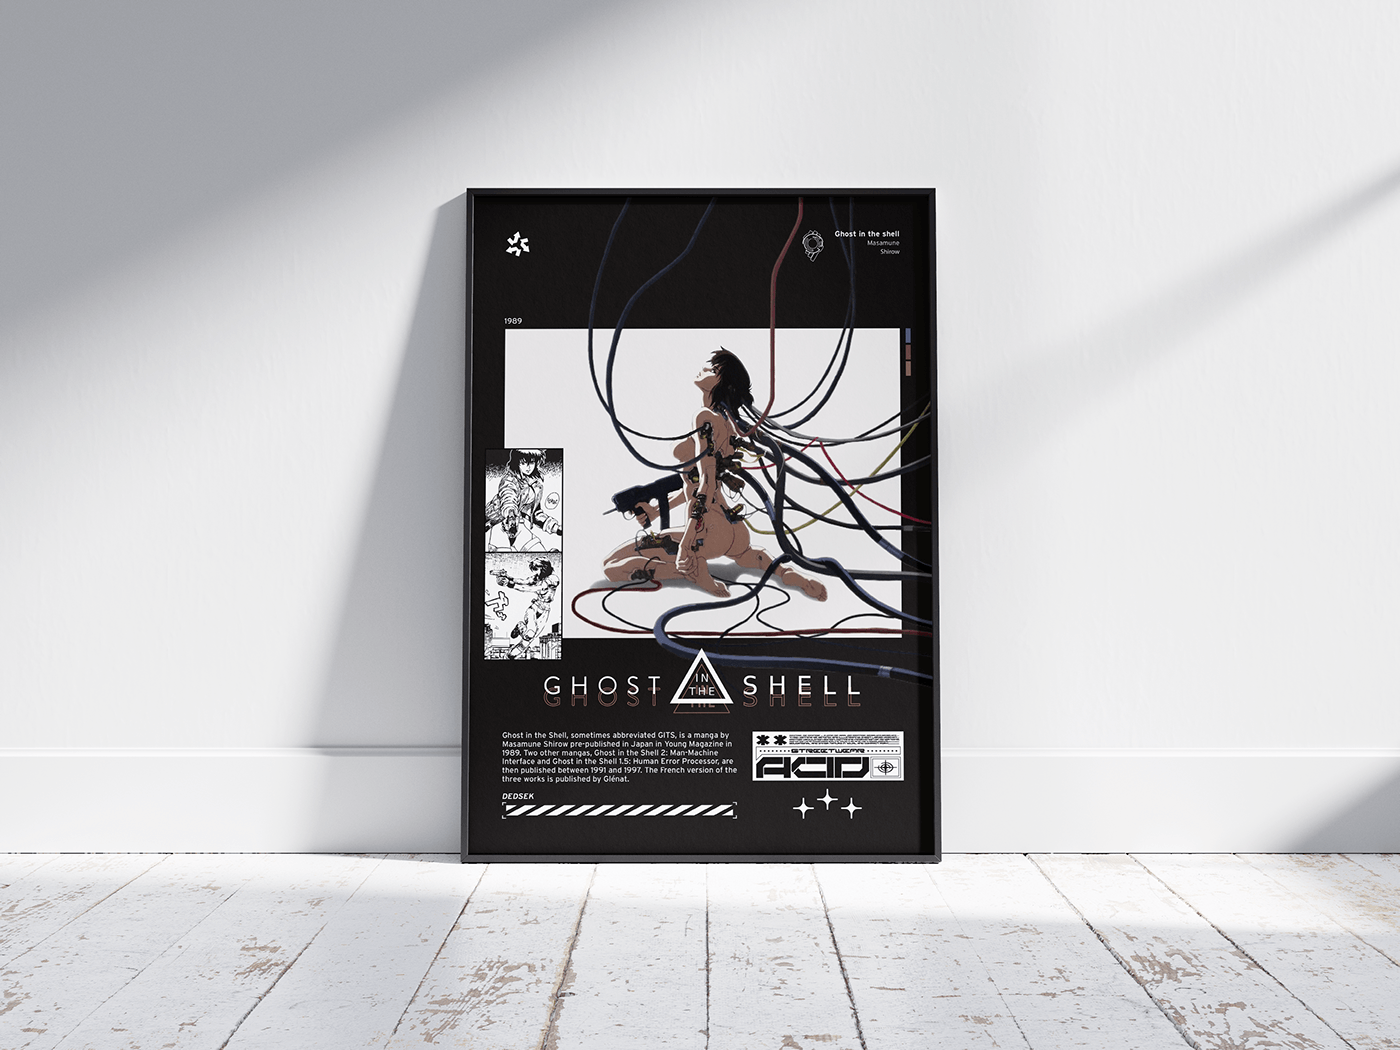 poster manga akira death note infographic design noir designer graphic flyer ghost in the shell